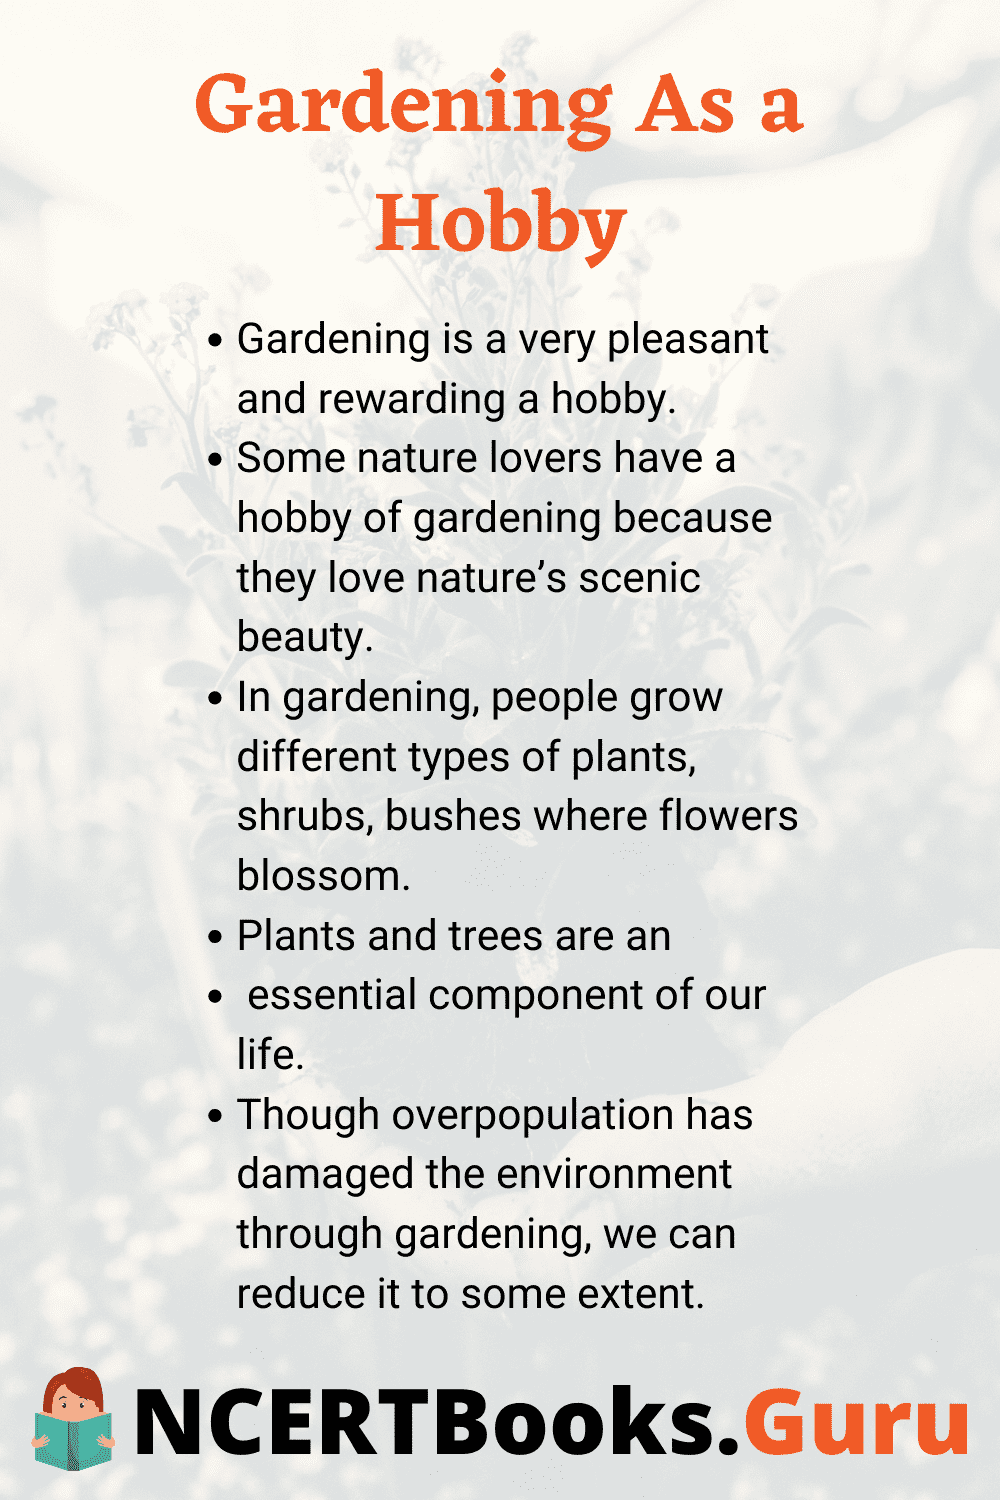 quotes on essay my hobby gardening